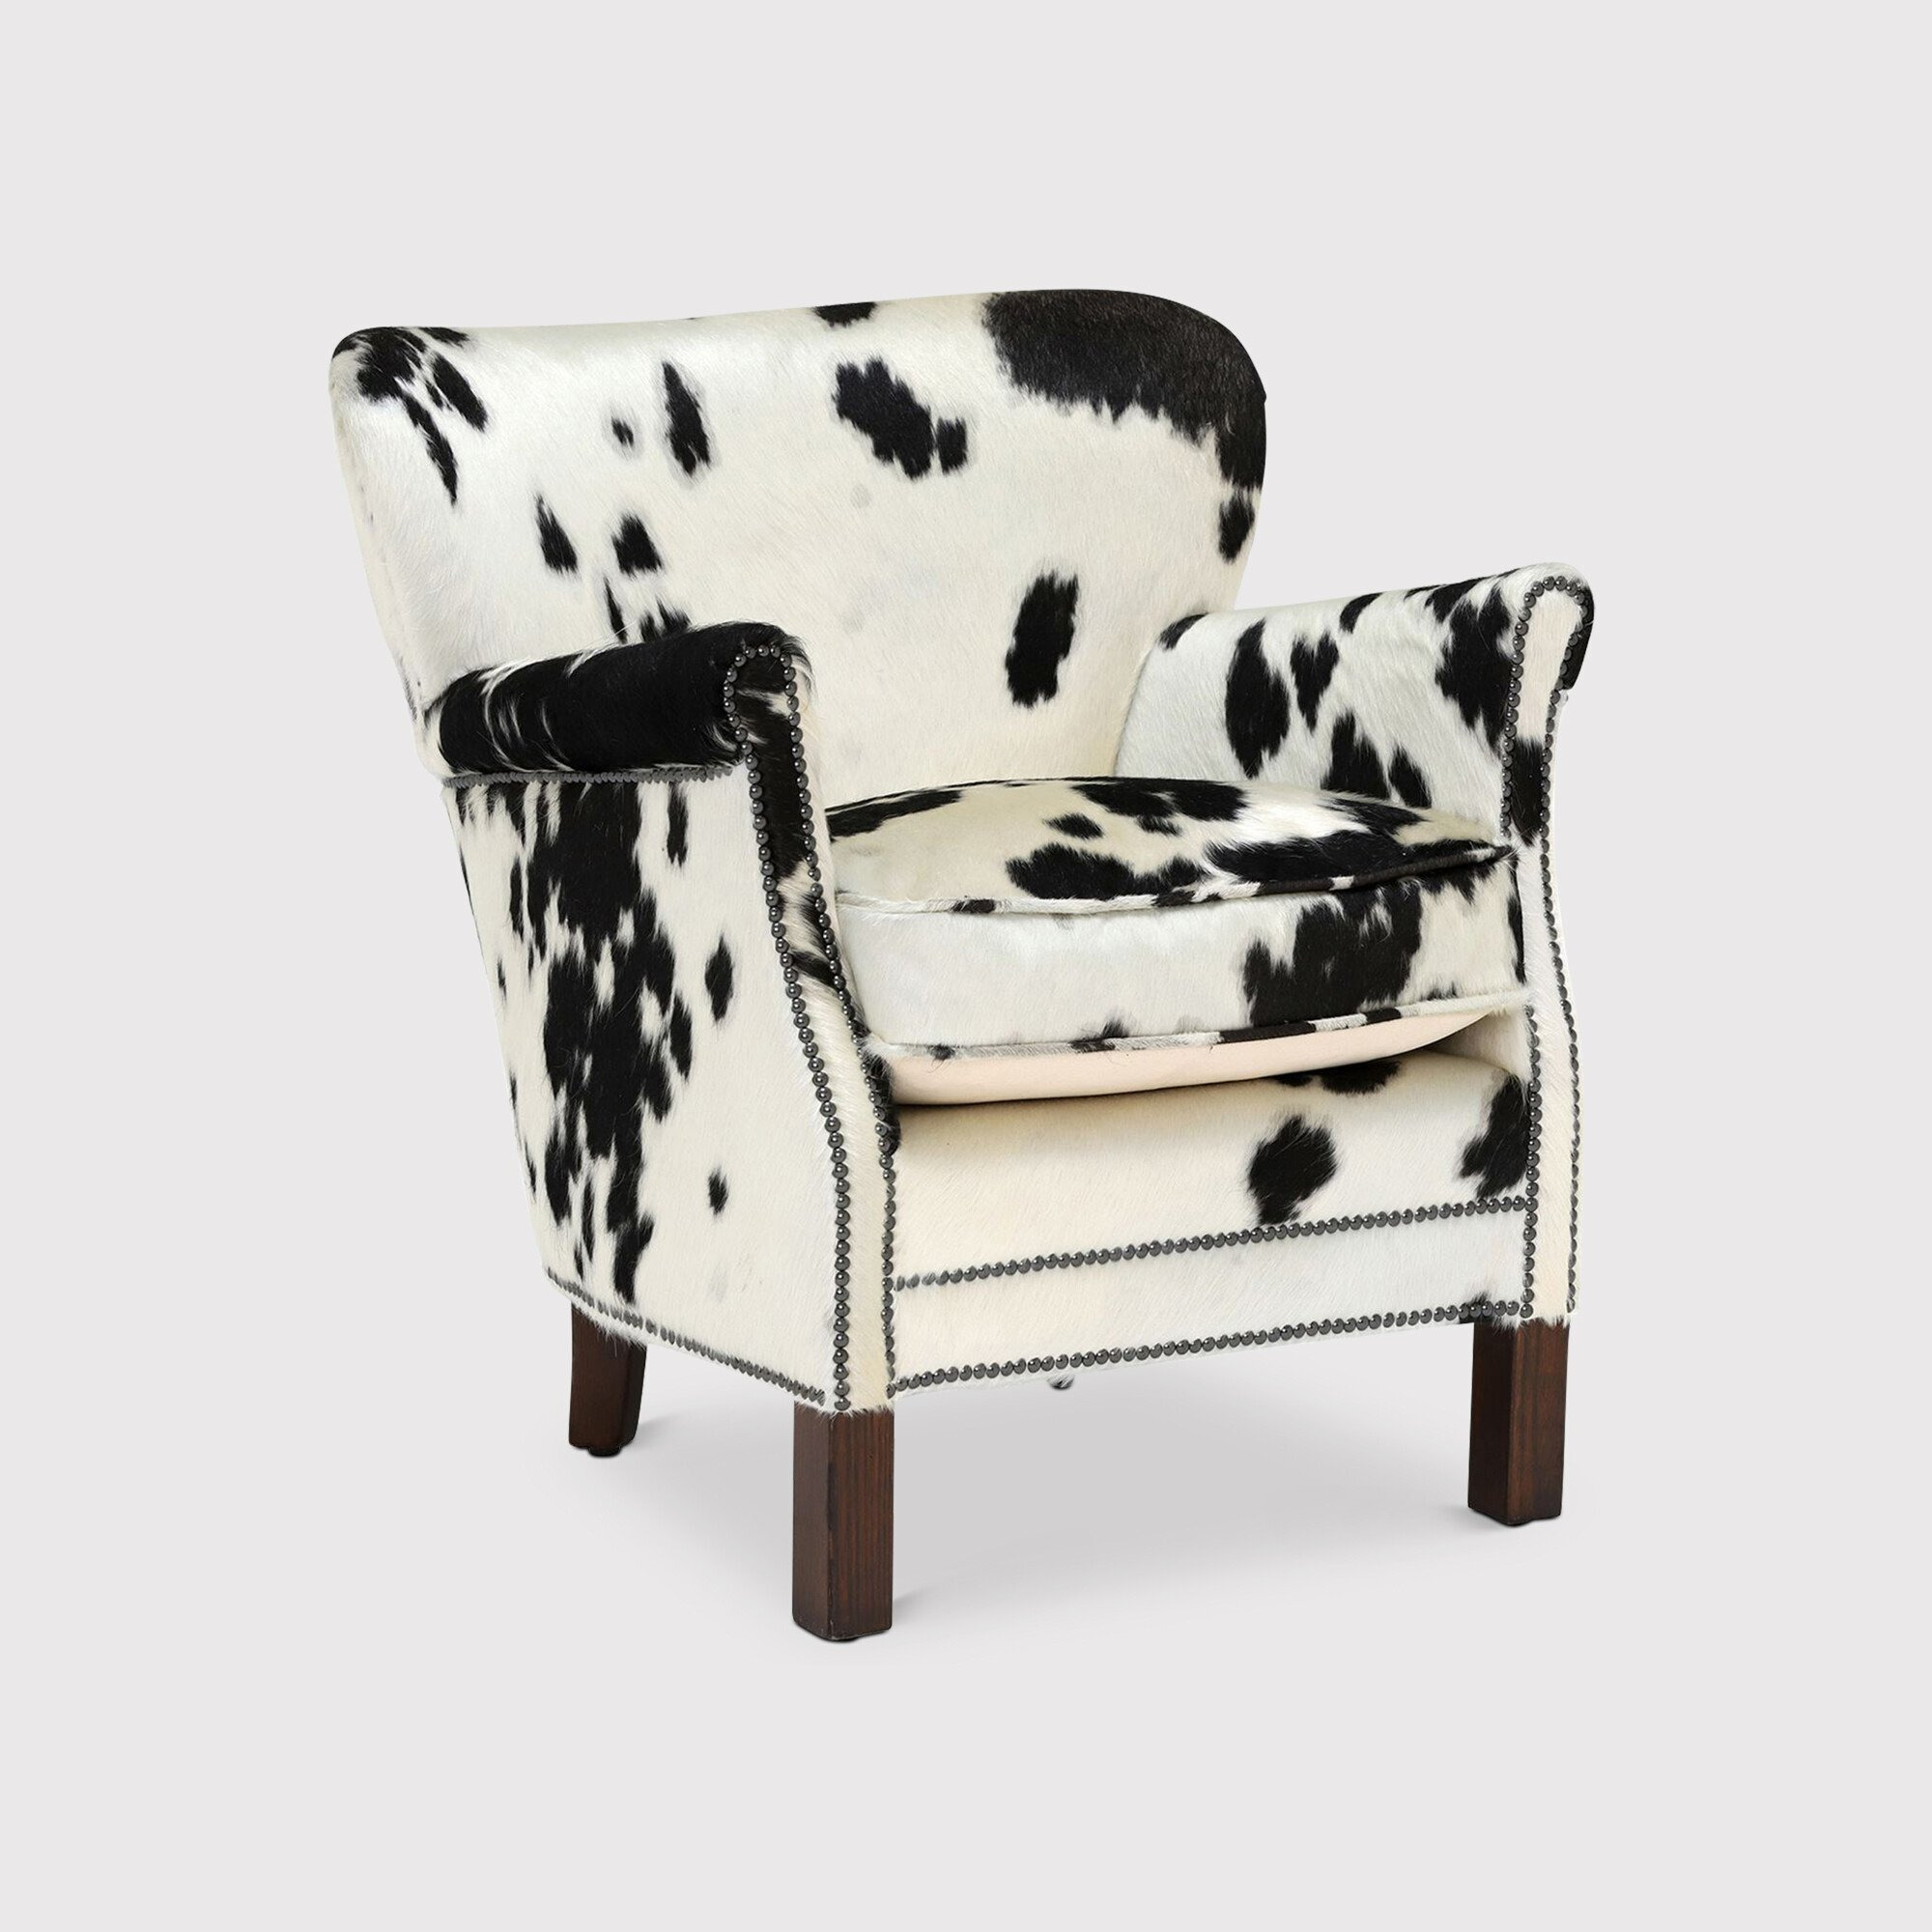 Timothy Oulton Professor Armchair, White Leather - Barker & Stonehouse - image 1